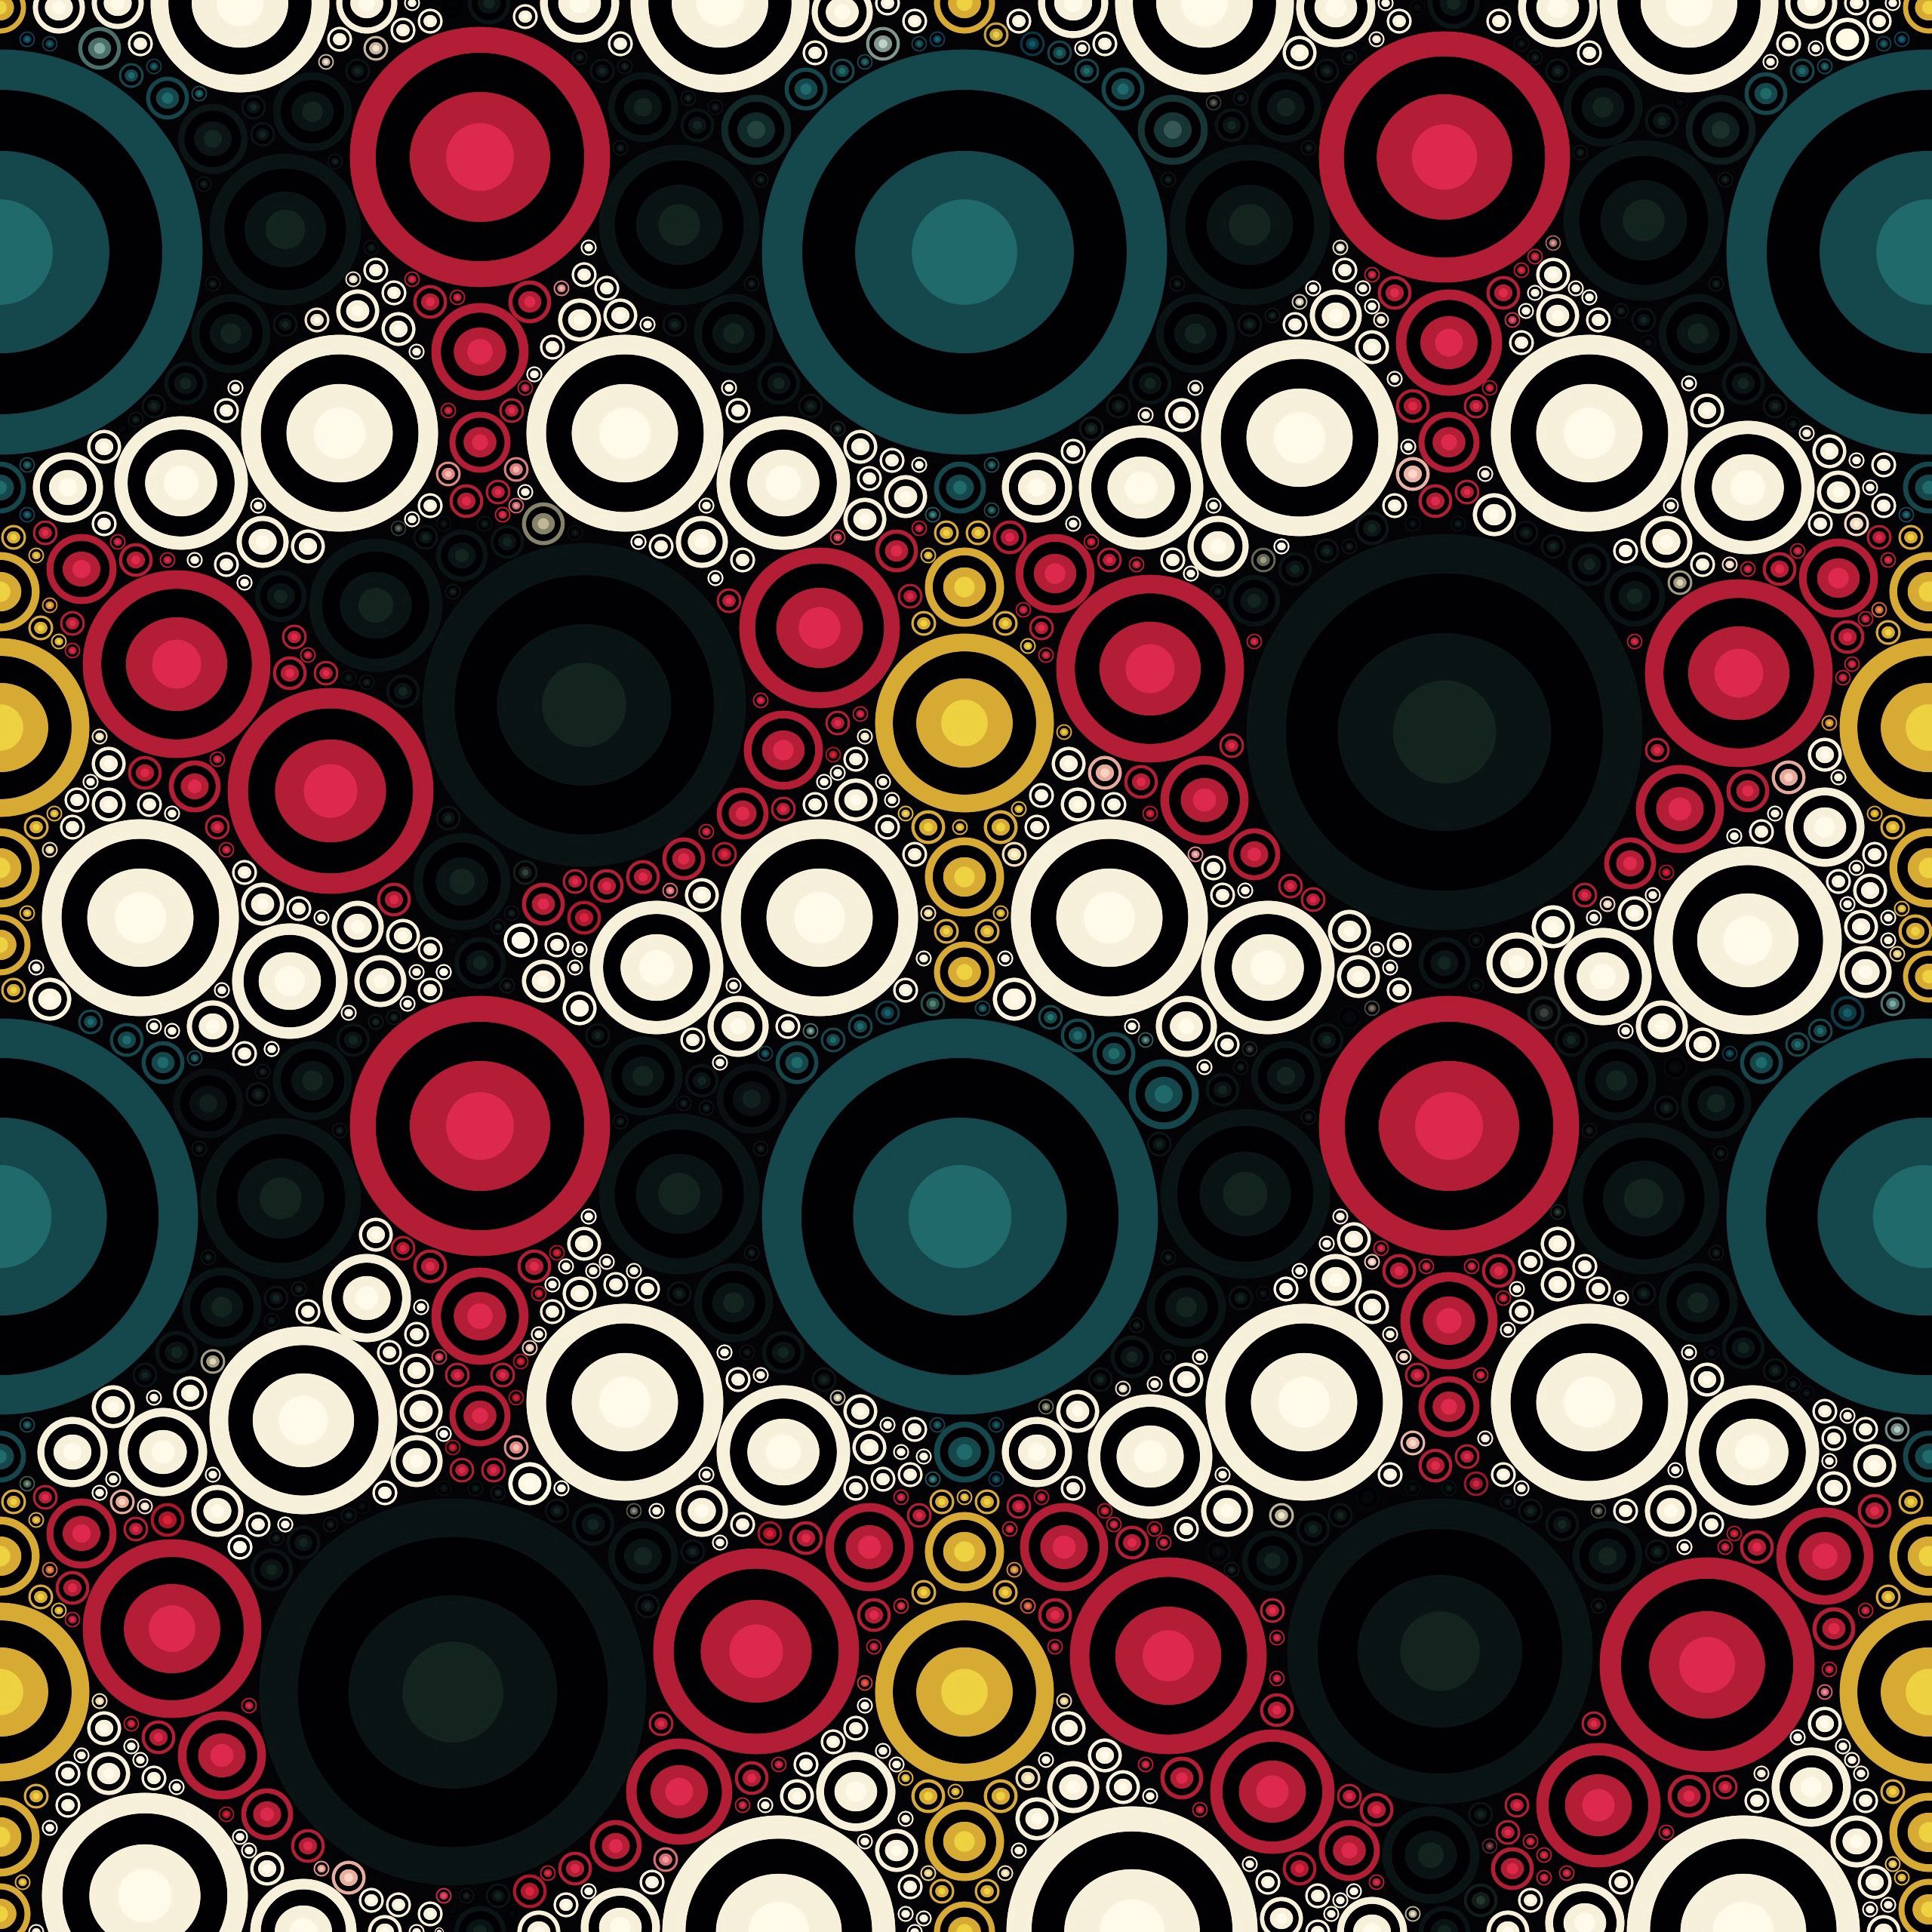 form, multicolored, patterns, circles, motley, pattern, texture, textures, forms